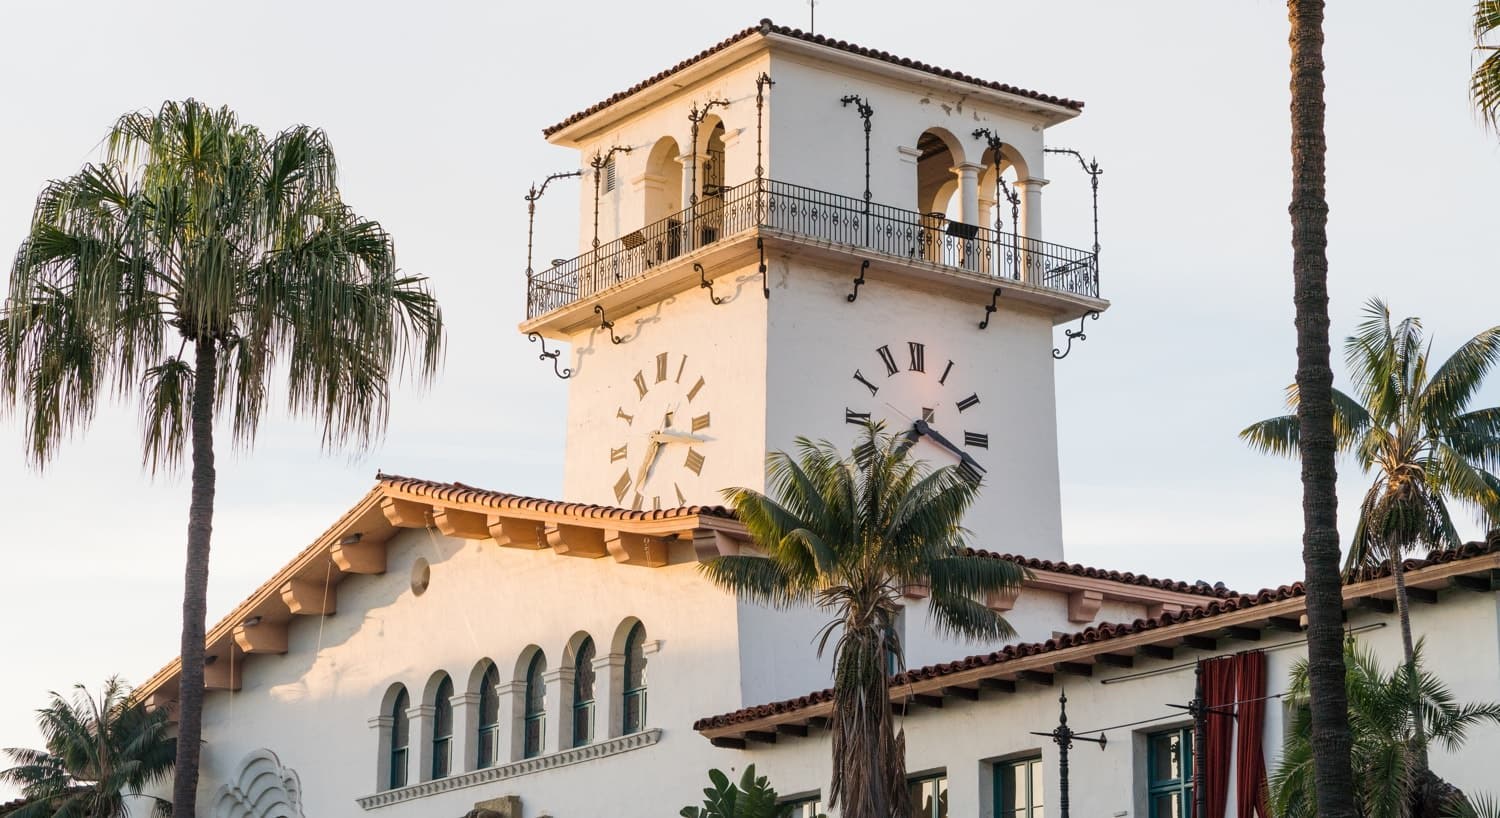 Spanish style ivory stucco building with red tile roof, large clock and tops of palm trees